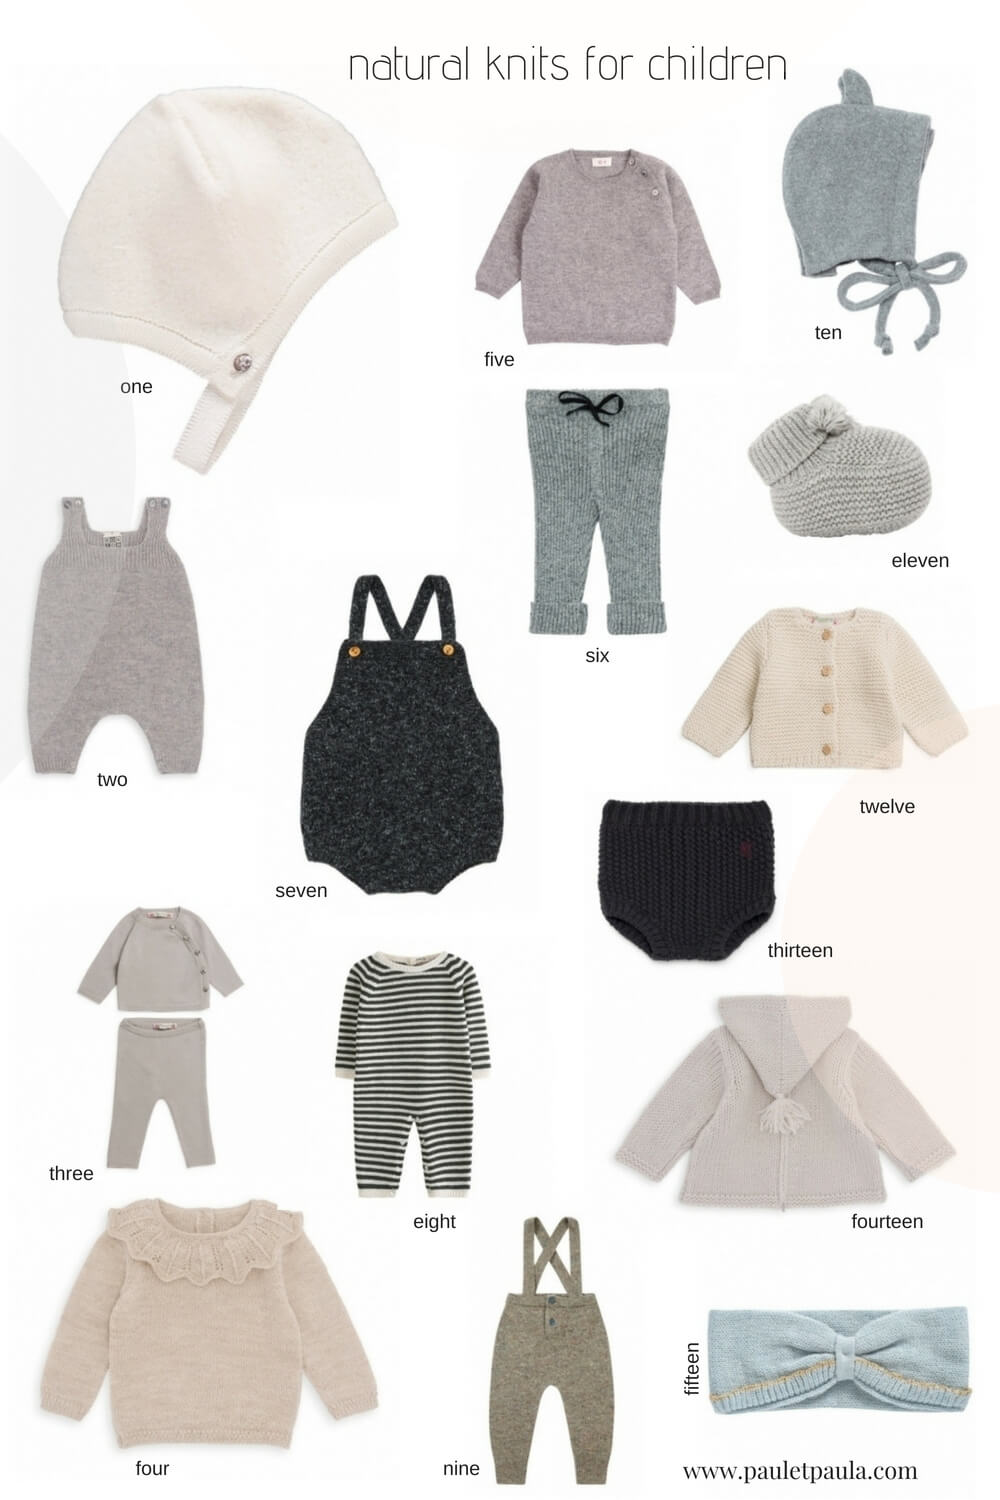 The best natural knits for children!